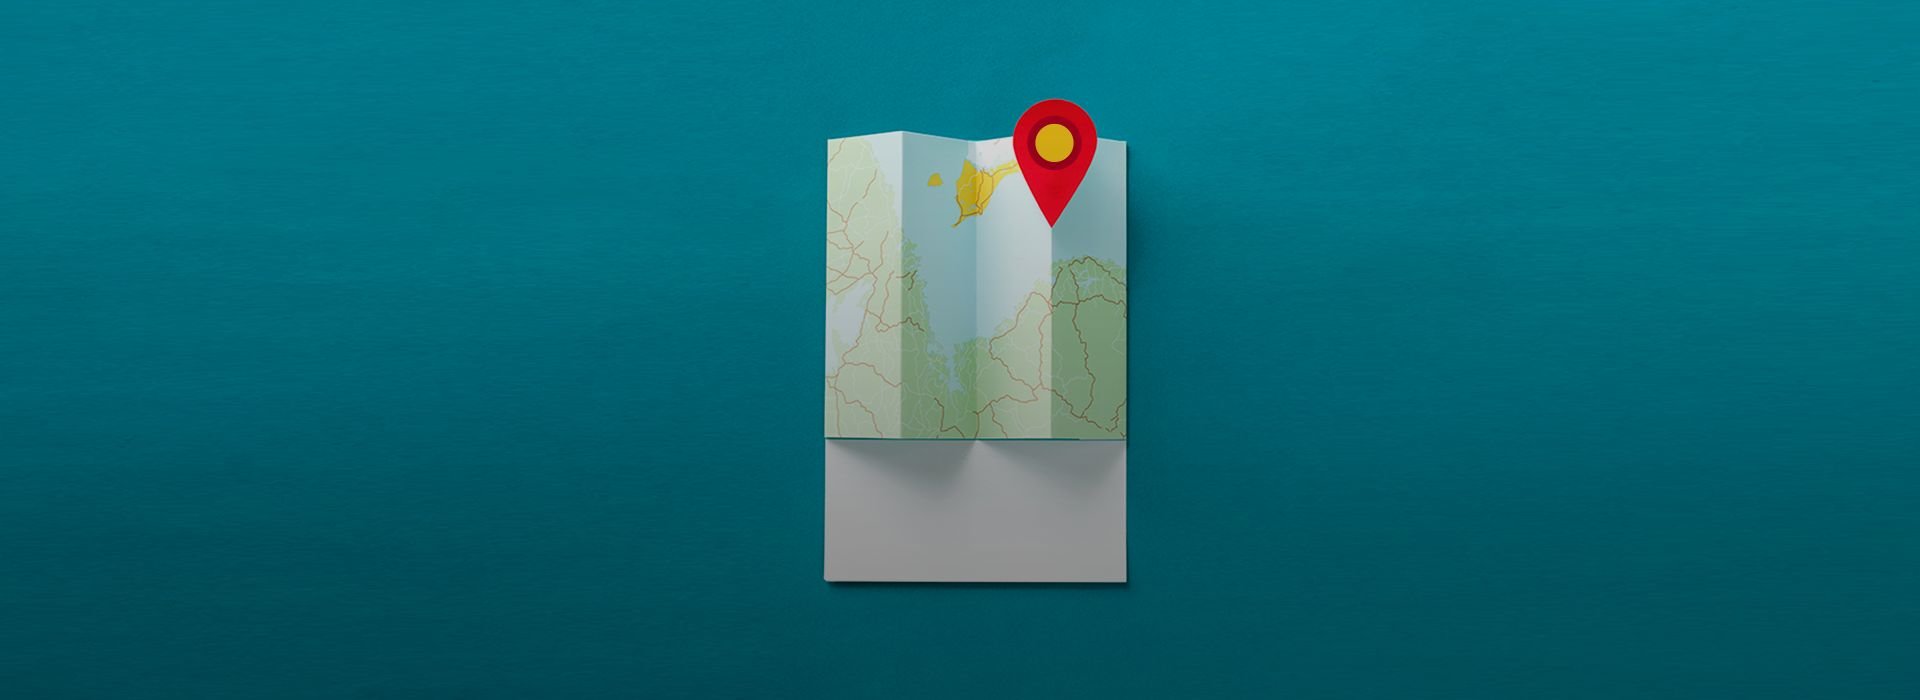 A pin on a map